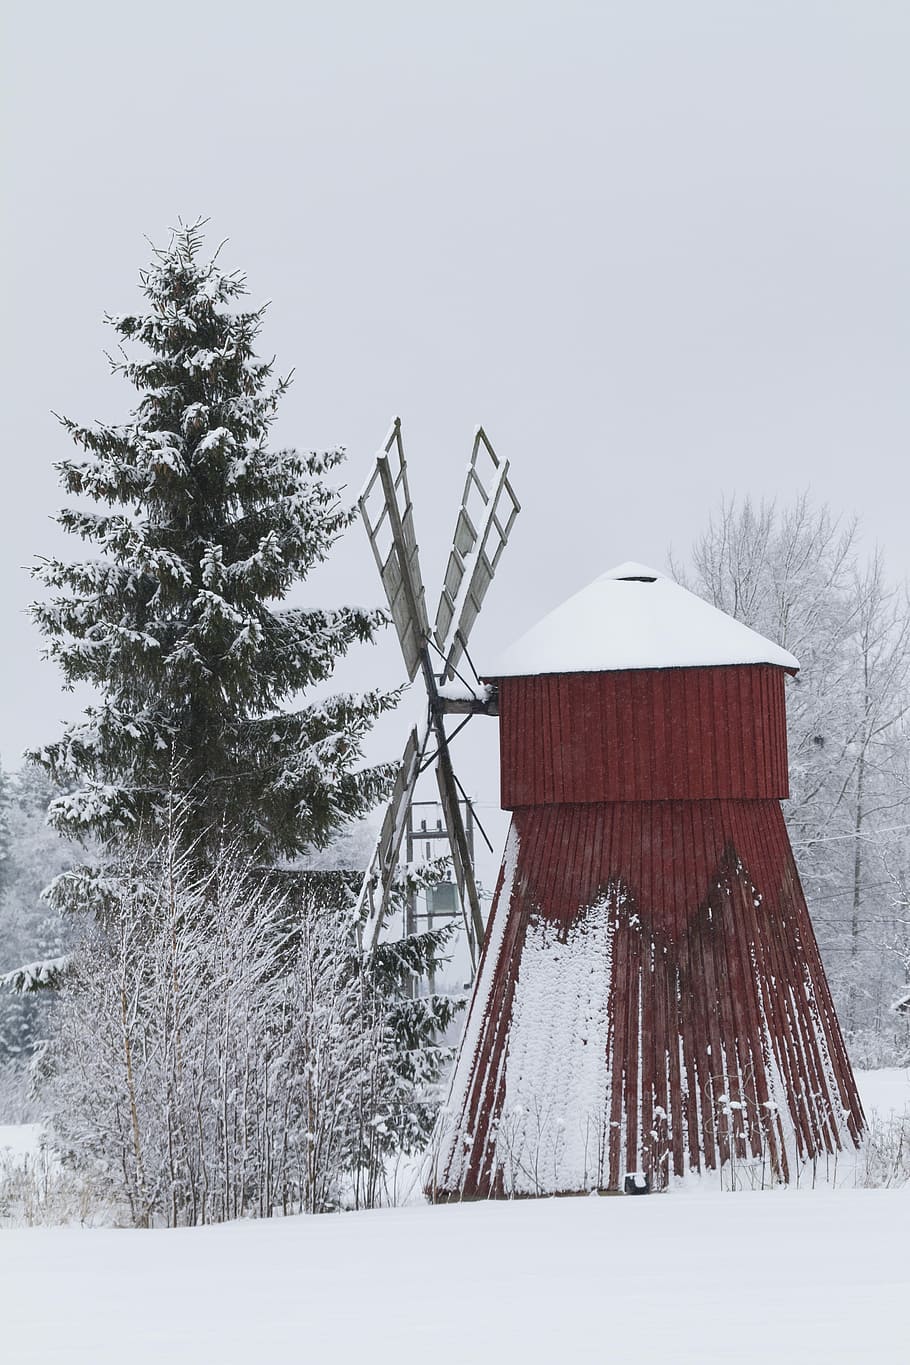 Windmill, Museum, Tower, Wings, museum, tower, the wings, winter, snow, bush, fog